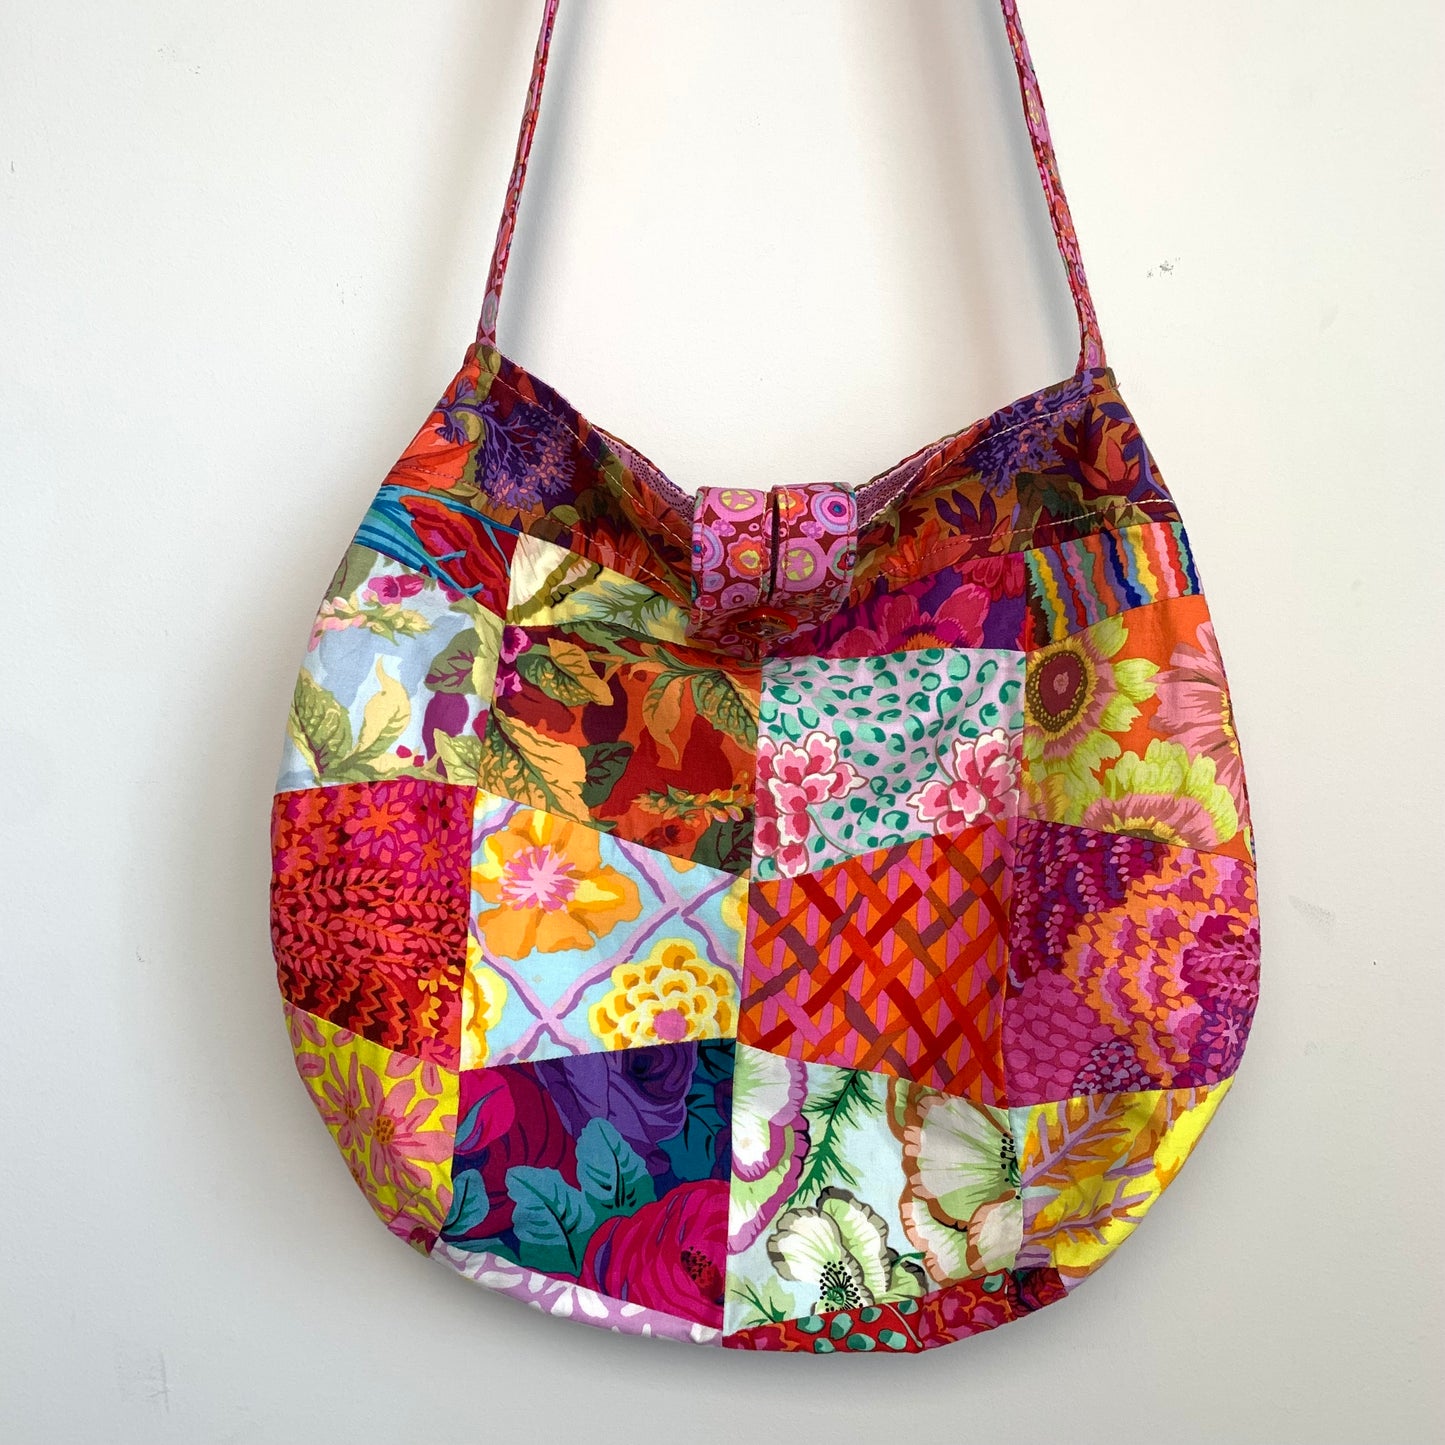 Handmade Quilted Patchwork Purse